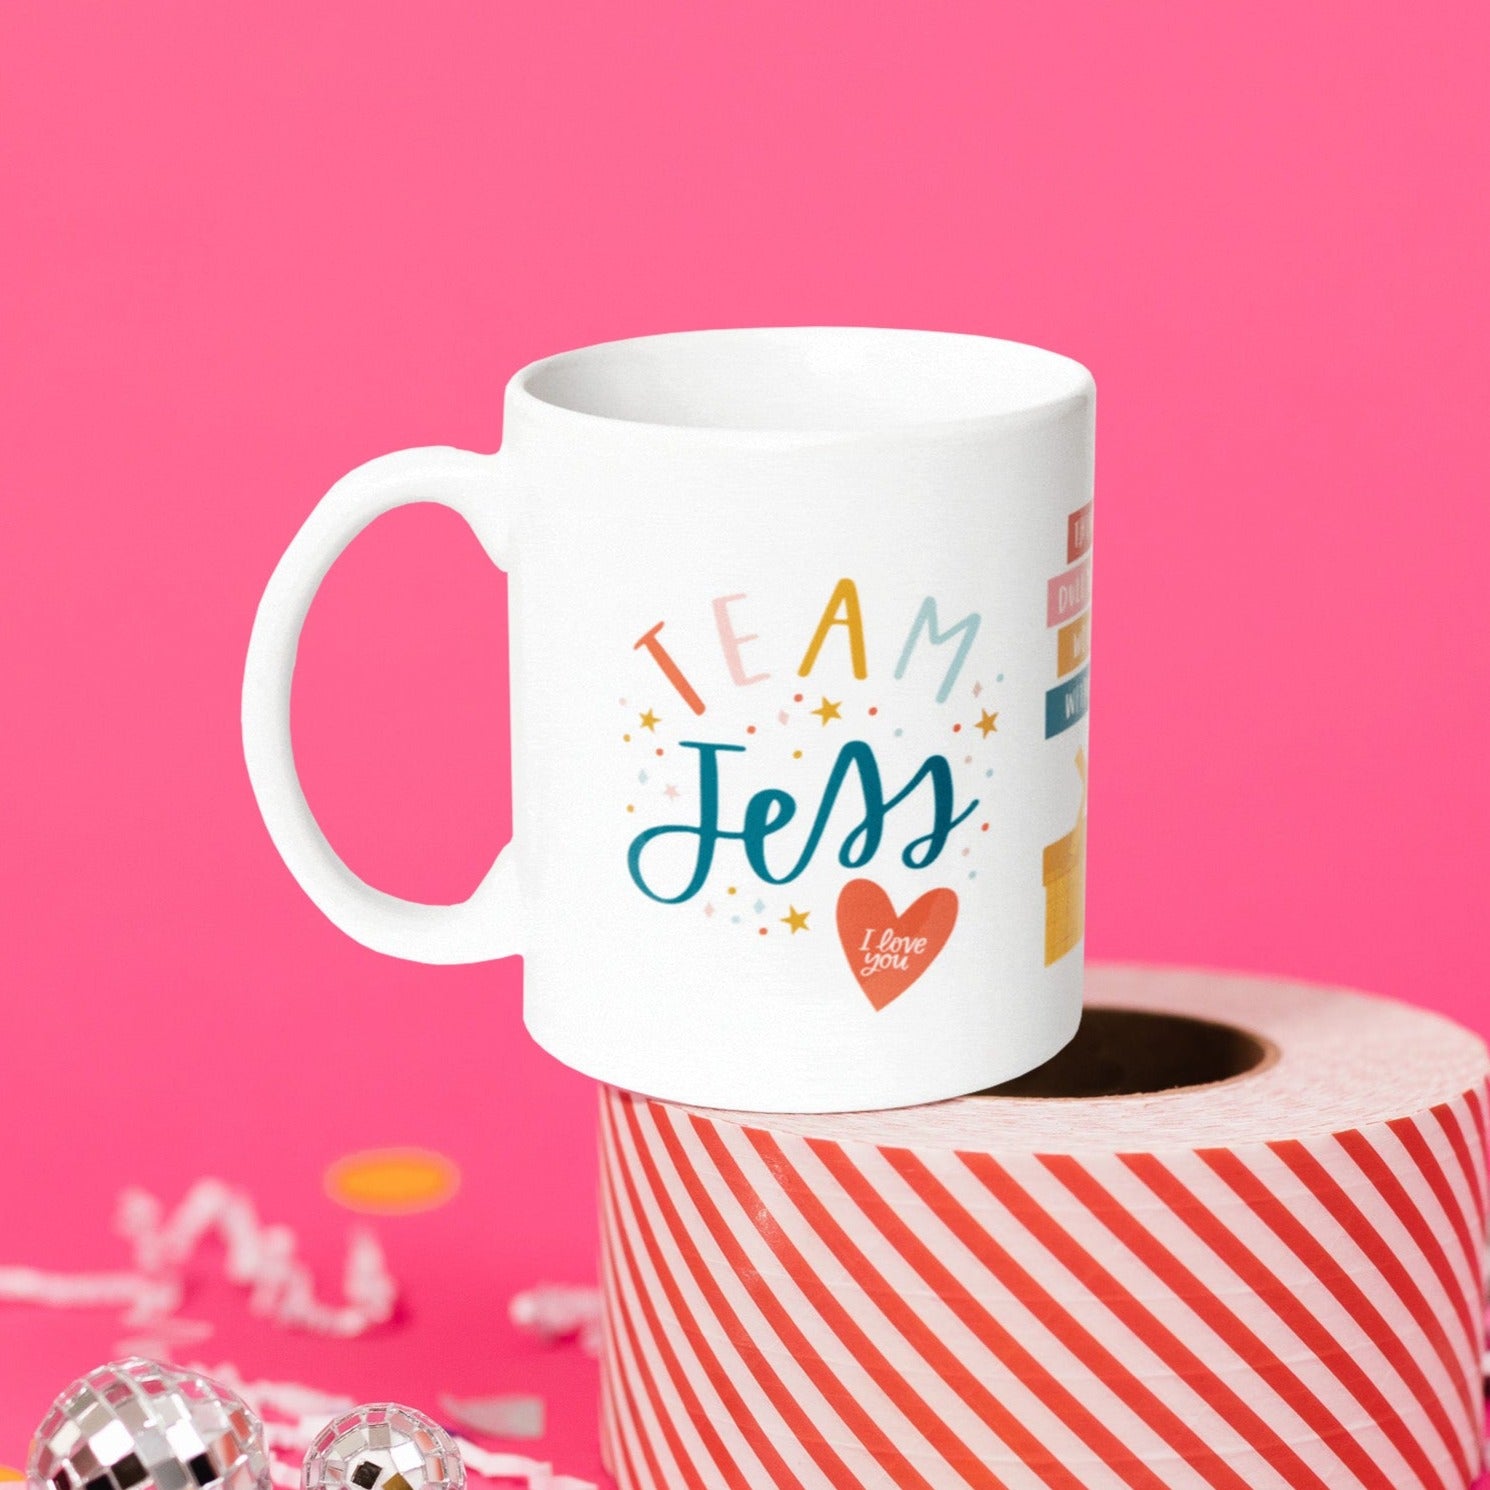 On a hot pink background sits a mug atop a red and white striped roll of packing tape with white crinkle and big, colorful confetti scattered around. There are mini disco balls. This Gilmore Girls inspired white mug says "TEAM Jess” and there are stars and colorful dots with a red heart at the bottom that says "I love you.”